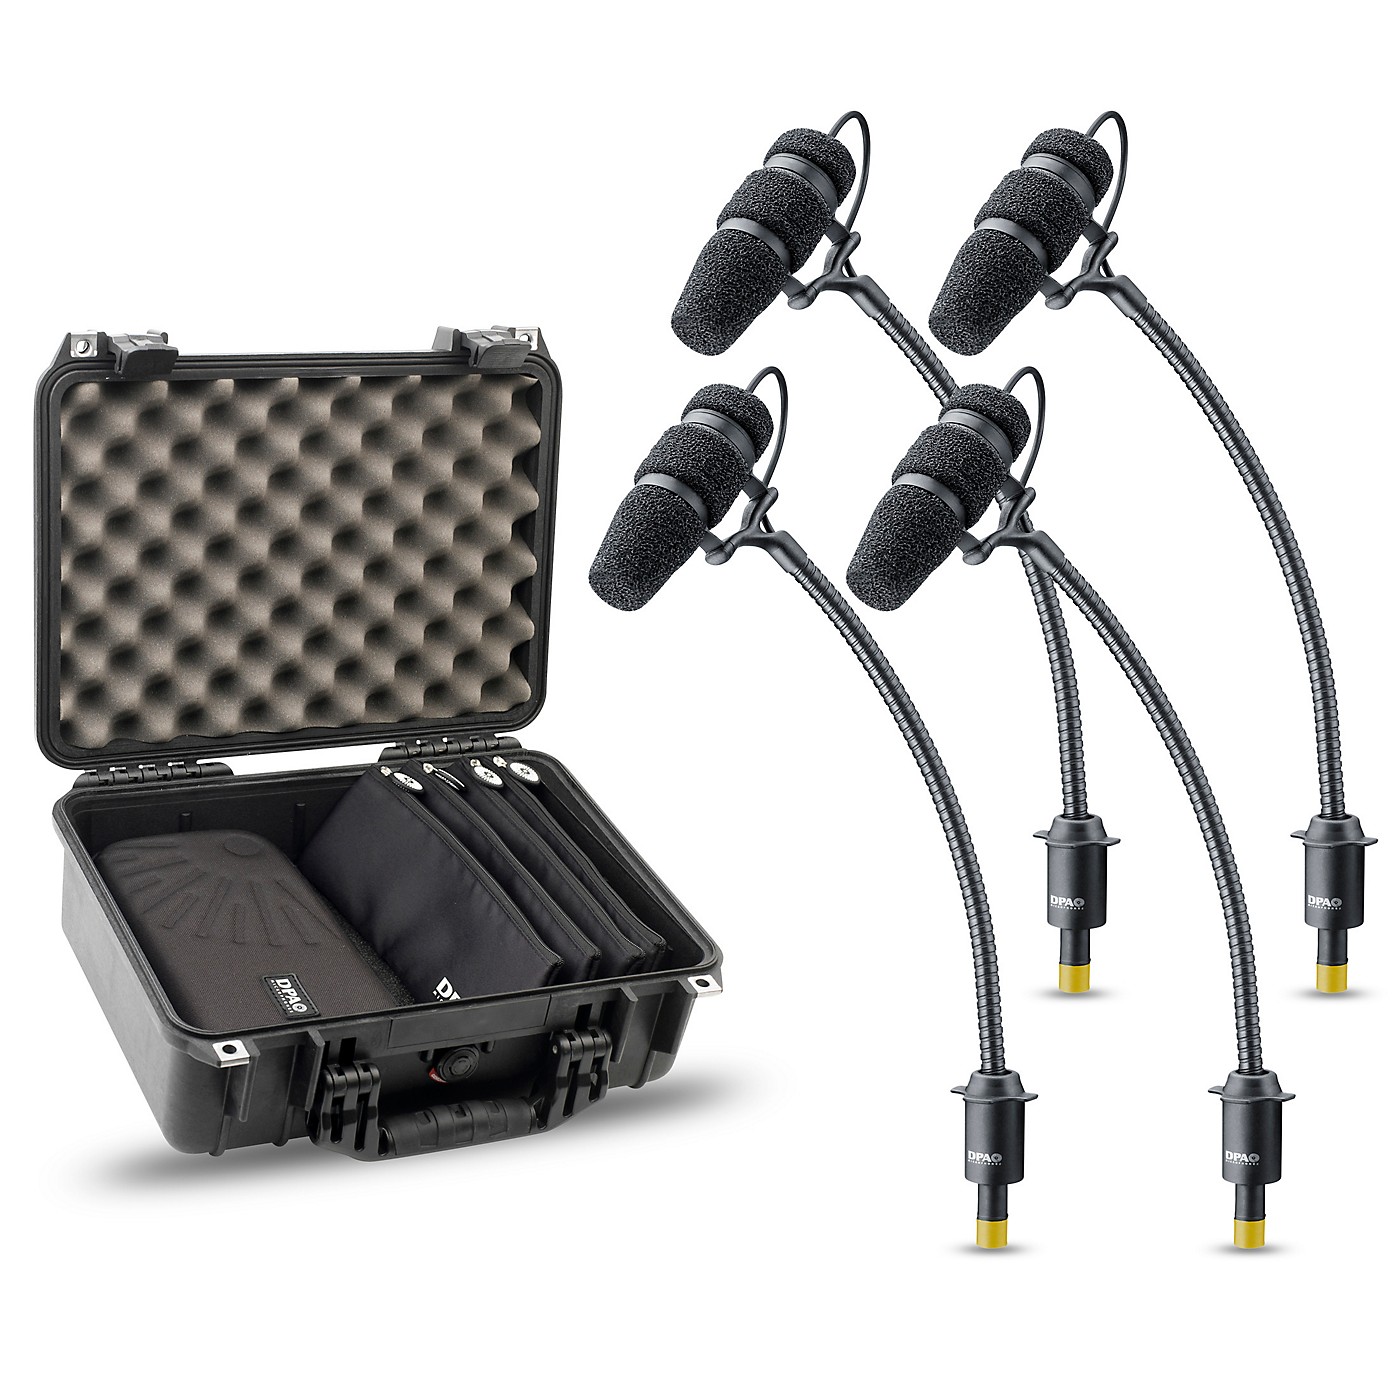 DPA Microphones d:vote CORE 4099 Mic Rock Touring Kit, 4 Mics and accessories, Extreme SPL in a Peli-case thumbnail